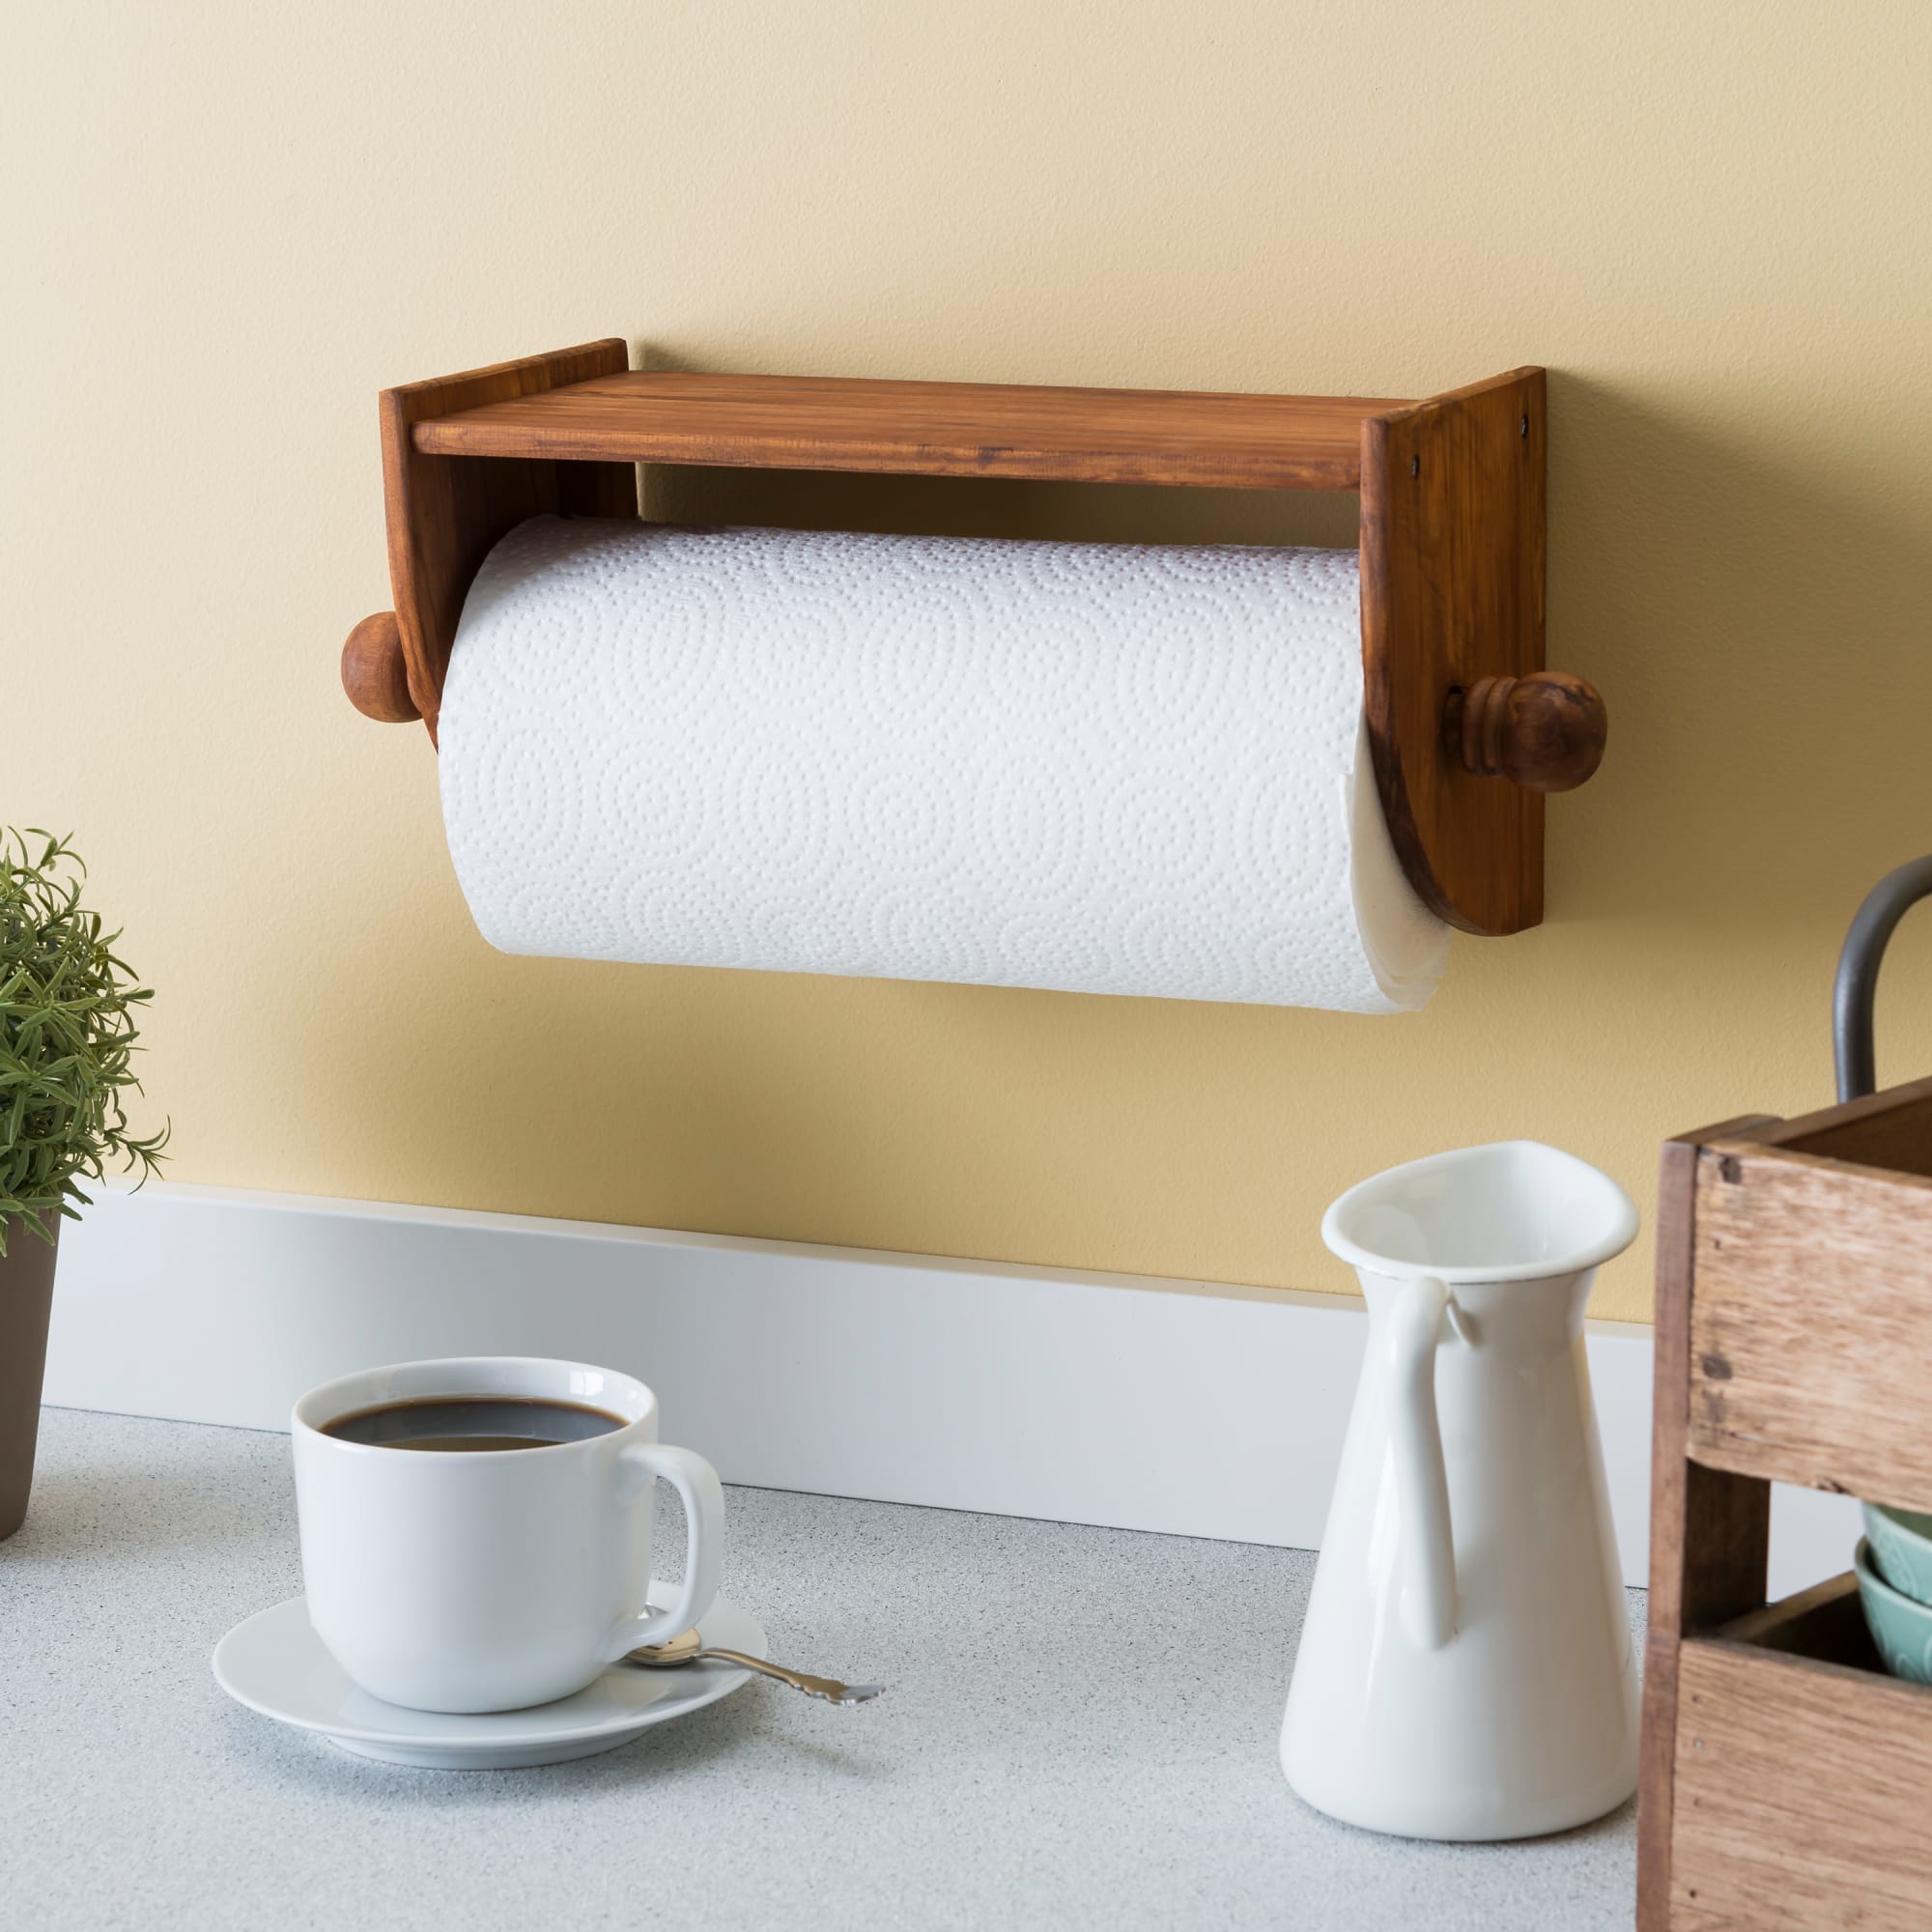 Home Basics Quick Install Rustic Pine Wood Wall Mounted Paper Towel Holder with Flat Top, Brown $5.00 EACH, CASE PACK OF 12